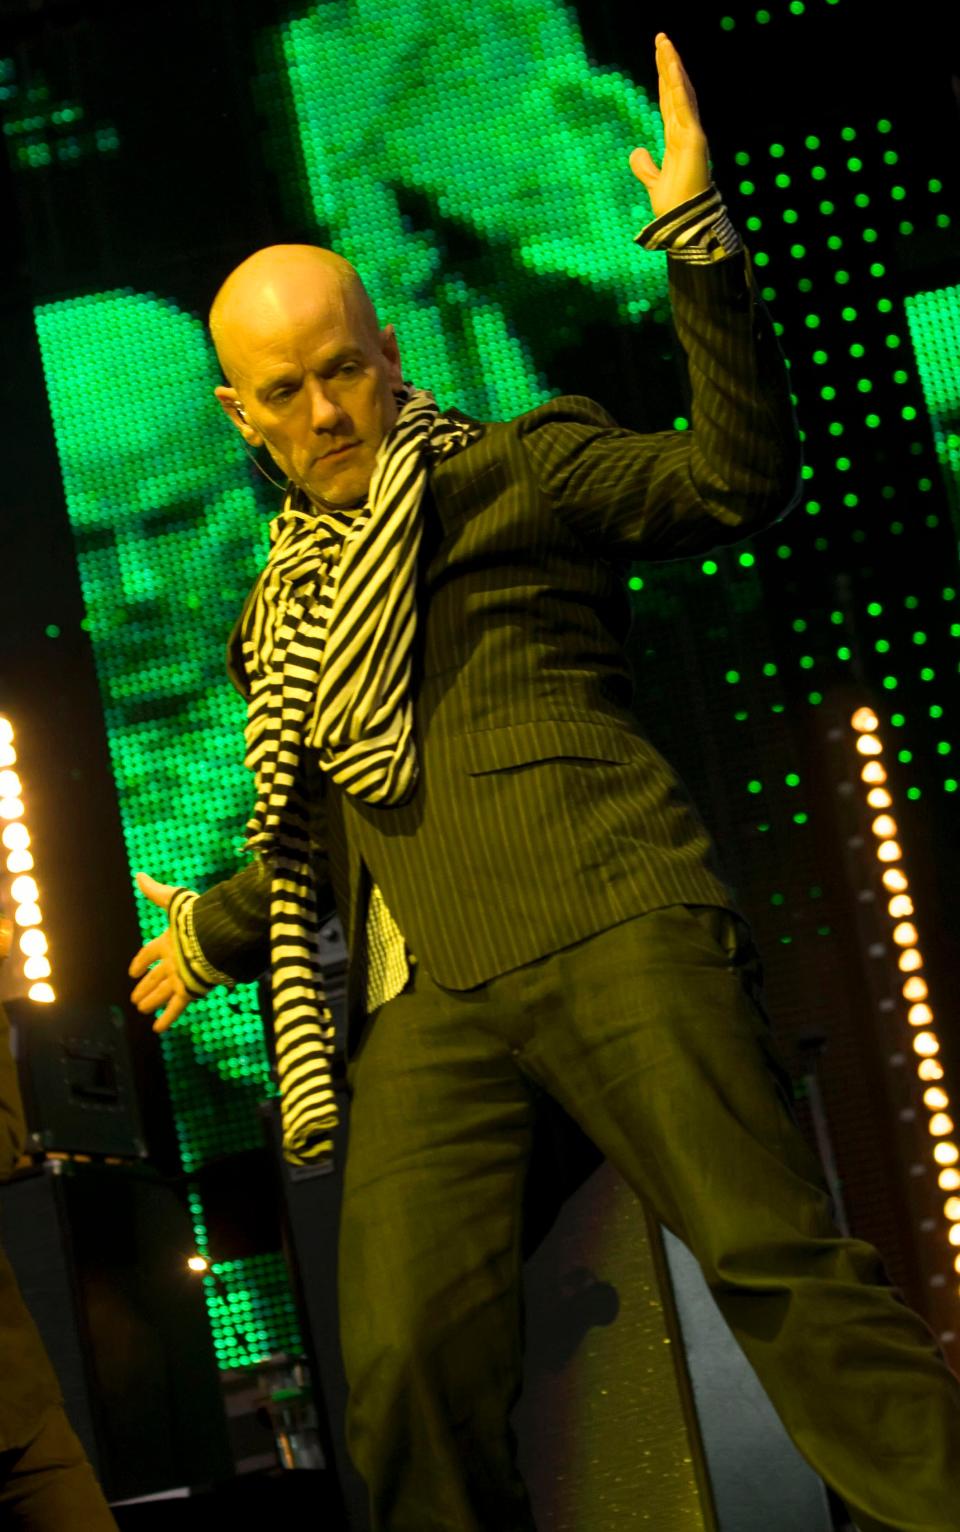 ONSTAGE WITH R.E.M. AT THE WALDBUEHNE, BERLIN, GERMANY, JULY 2008